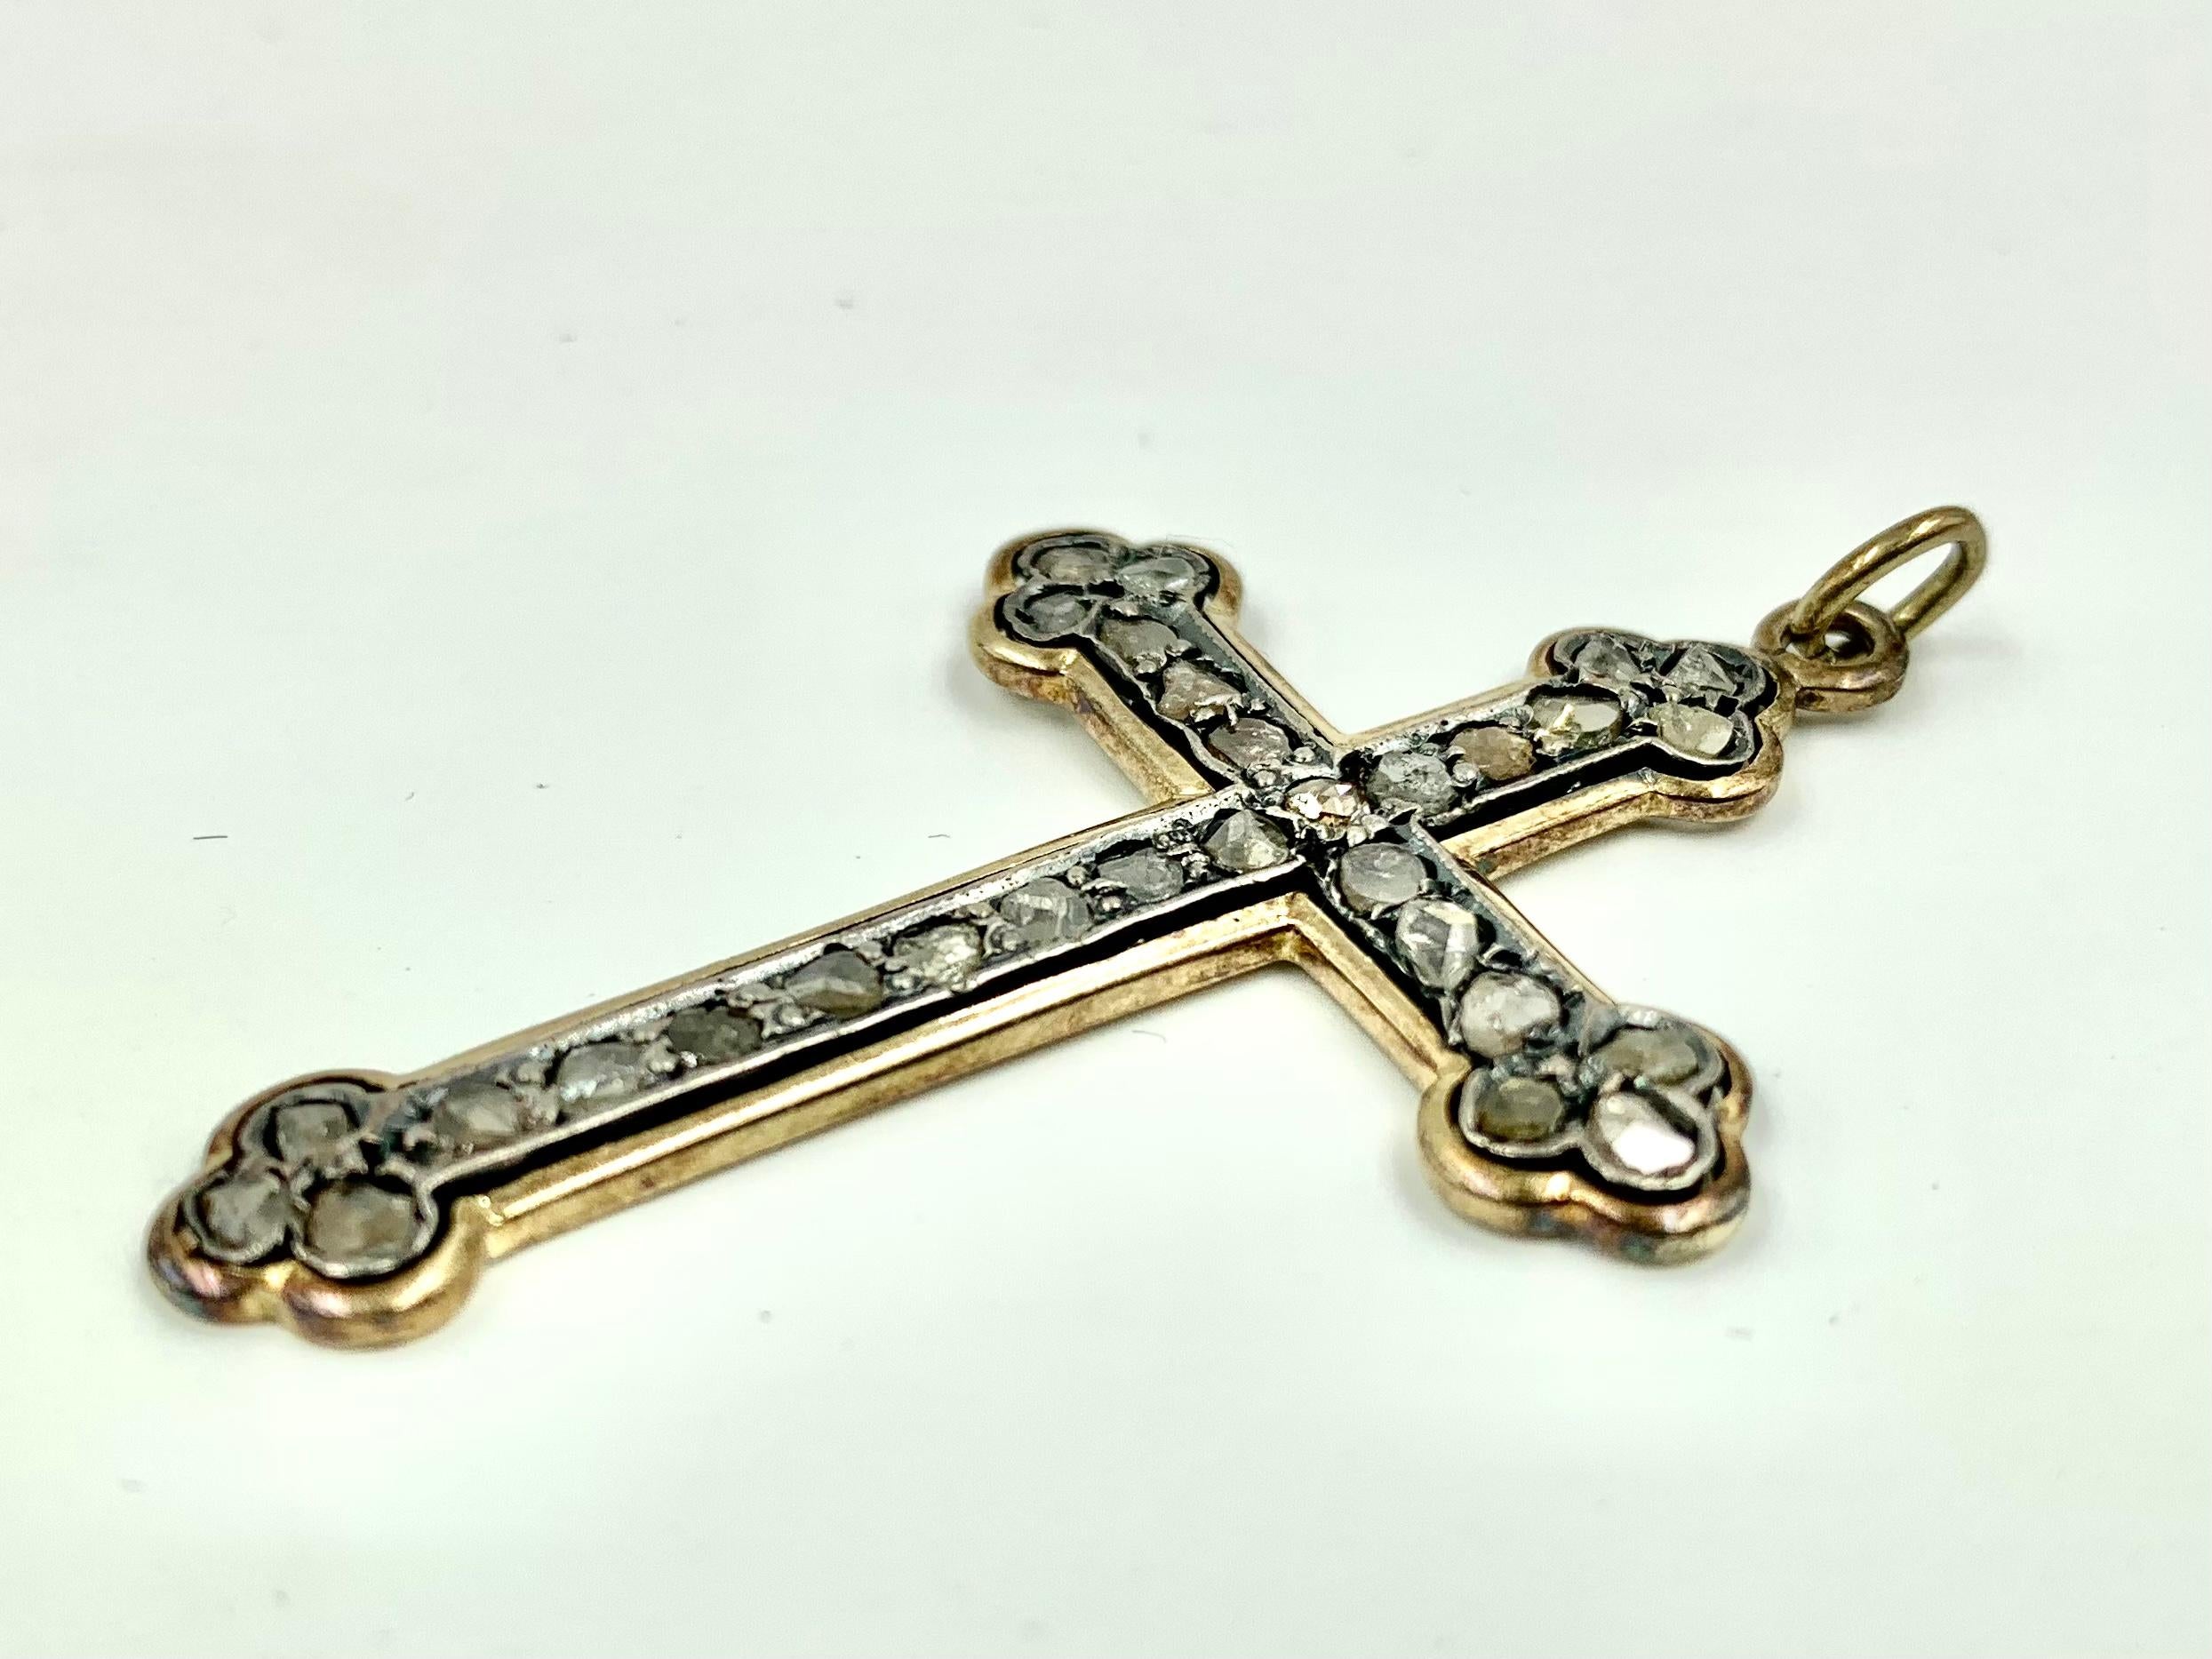 cross with trilobed terminals